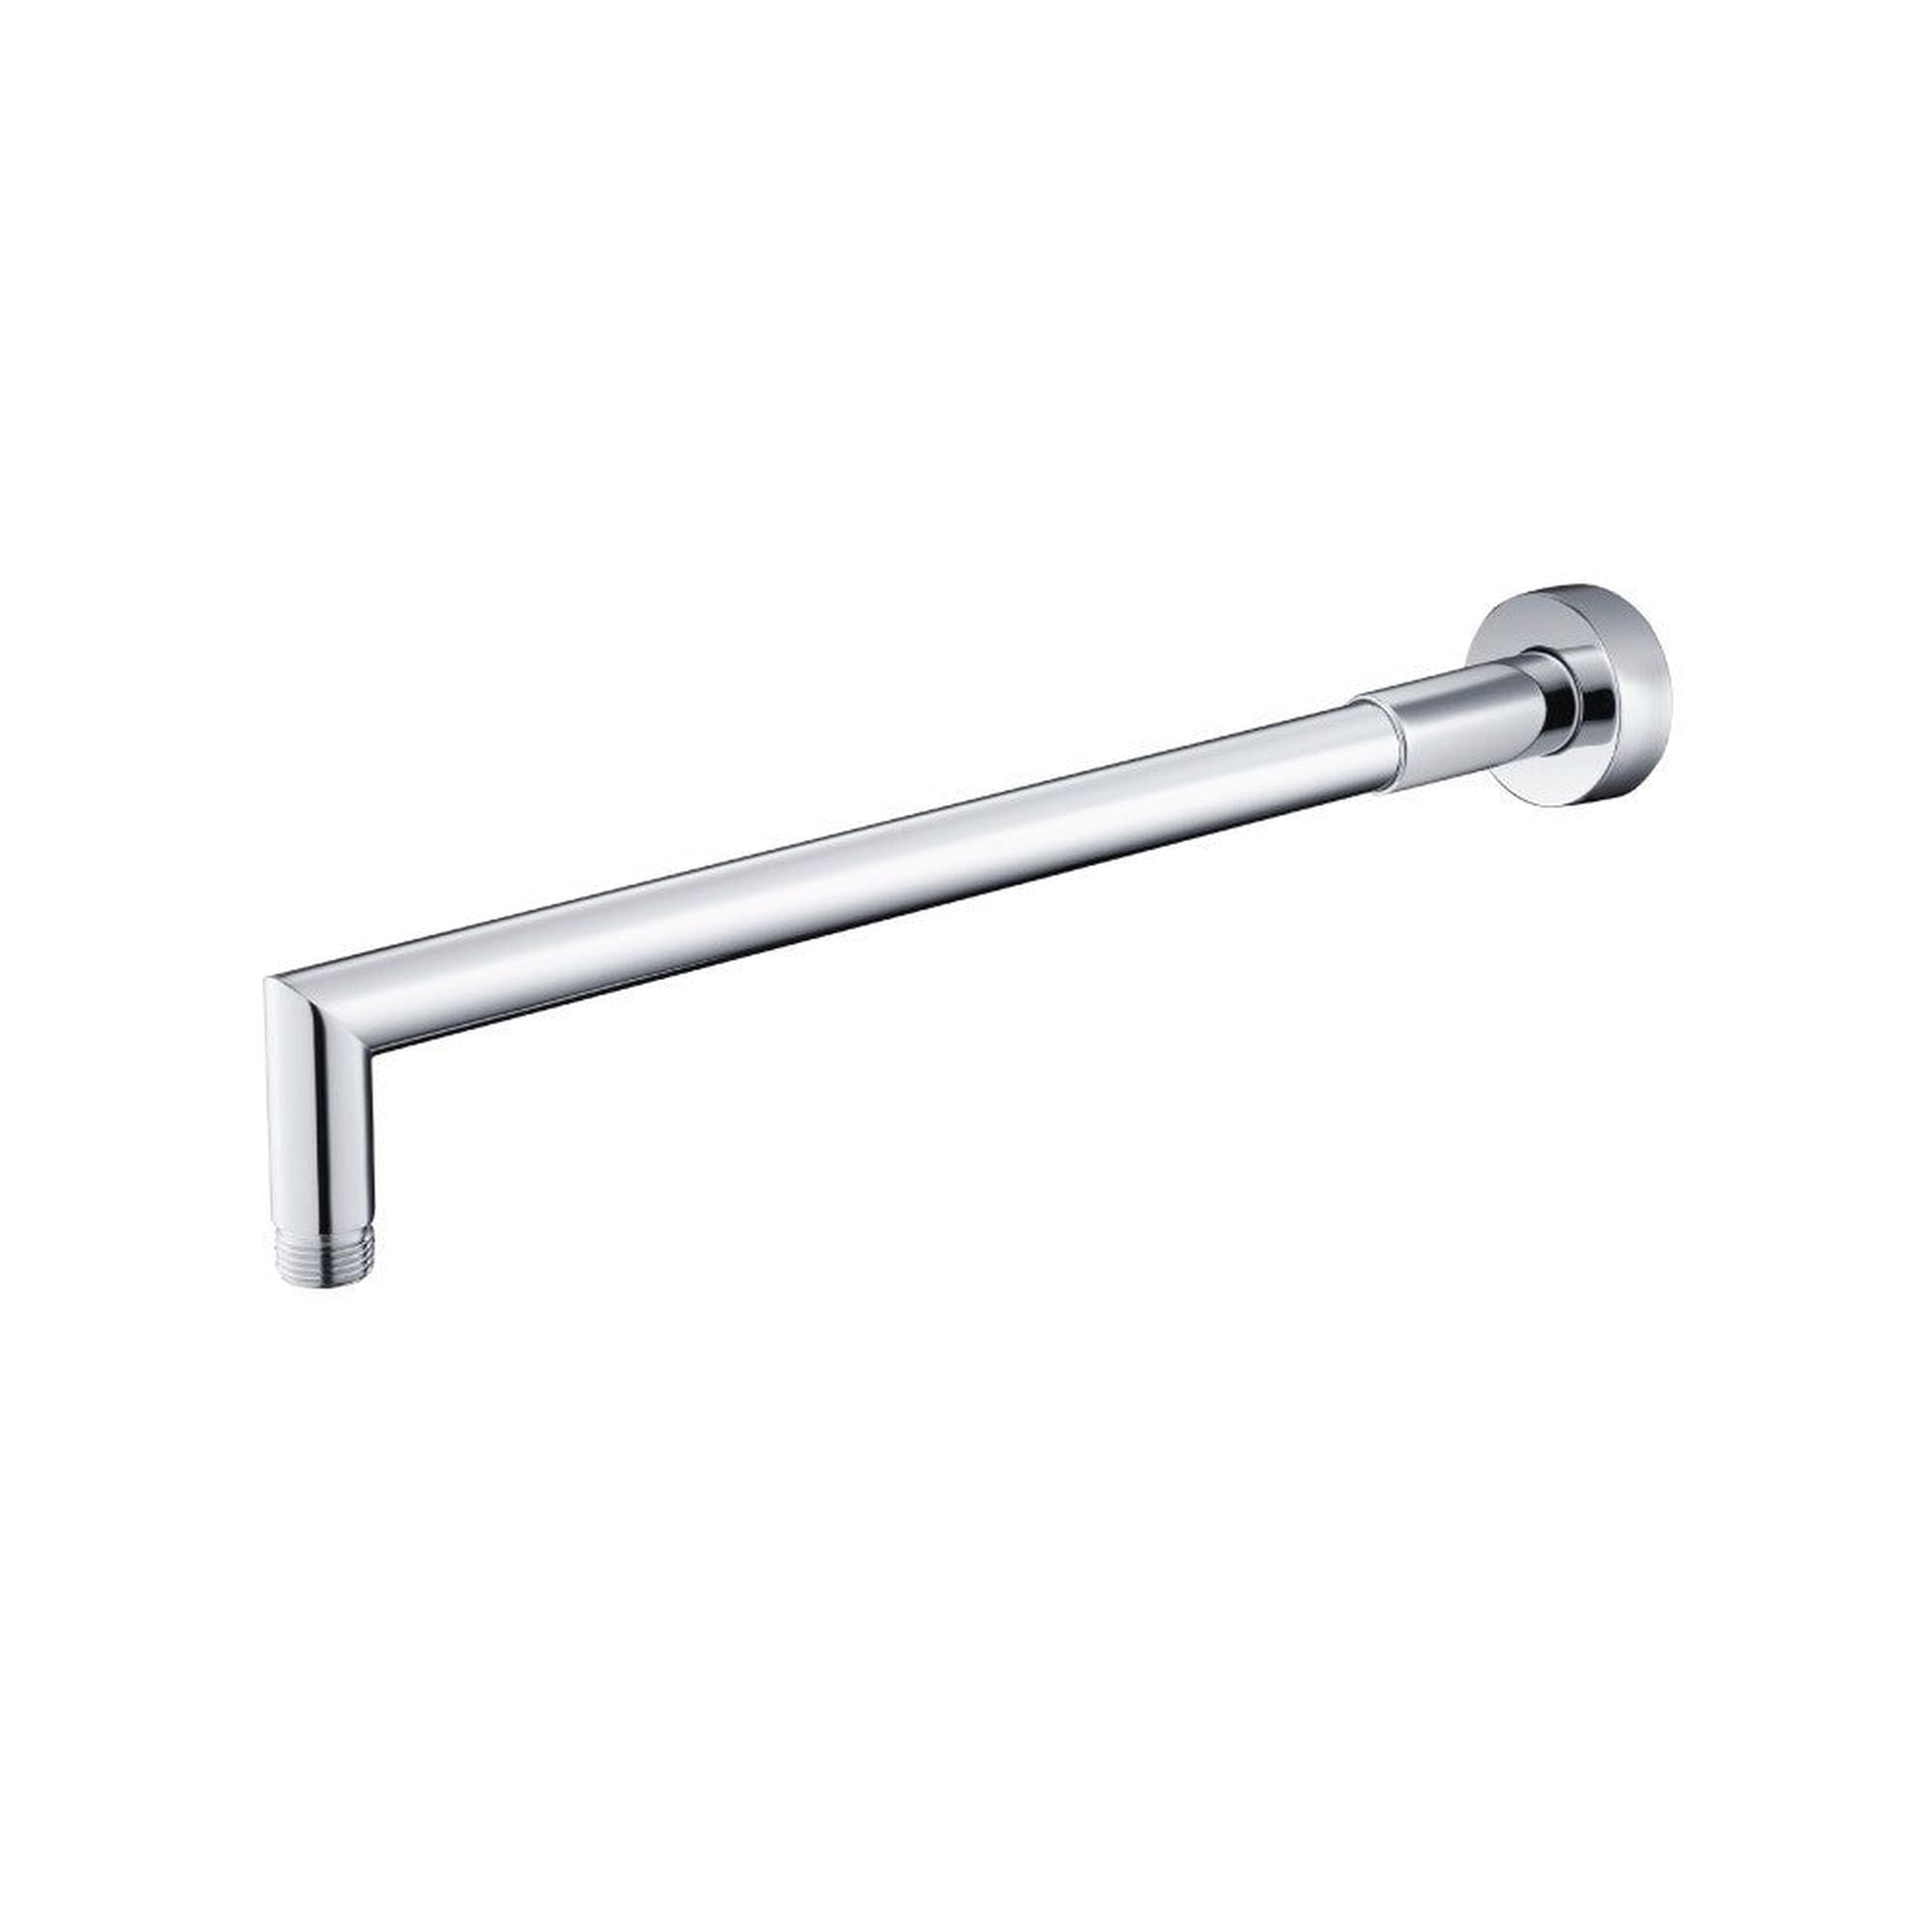 Isenberg Universal Fixtures 16" Chrome Solid Brass Wall-Mounted Shower Arm With Angled Extension and Round Sliding Flange